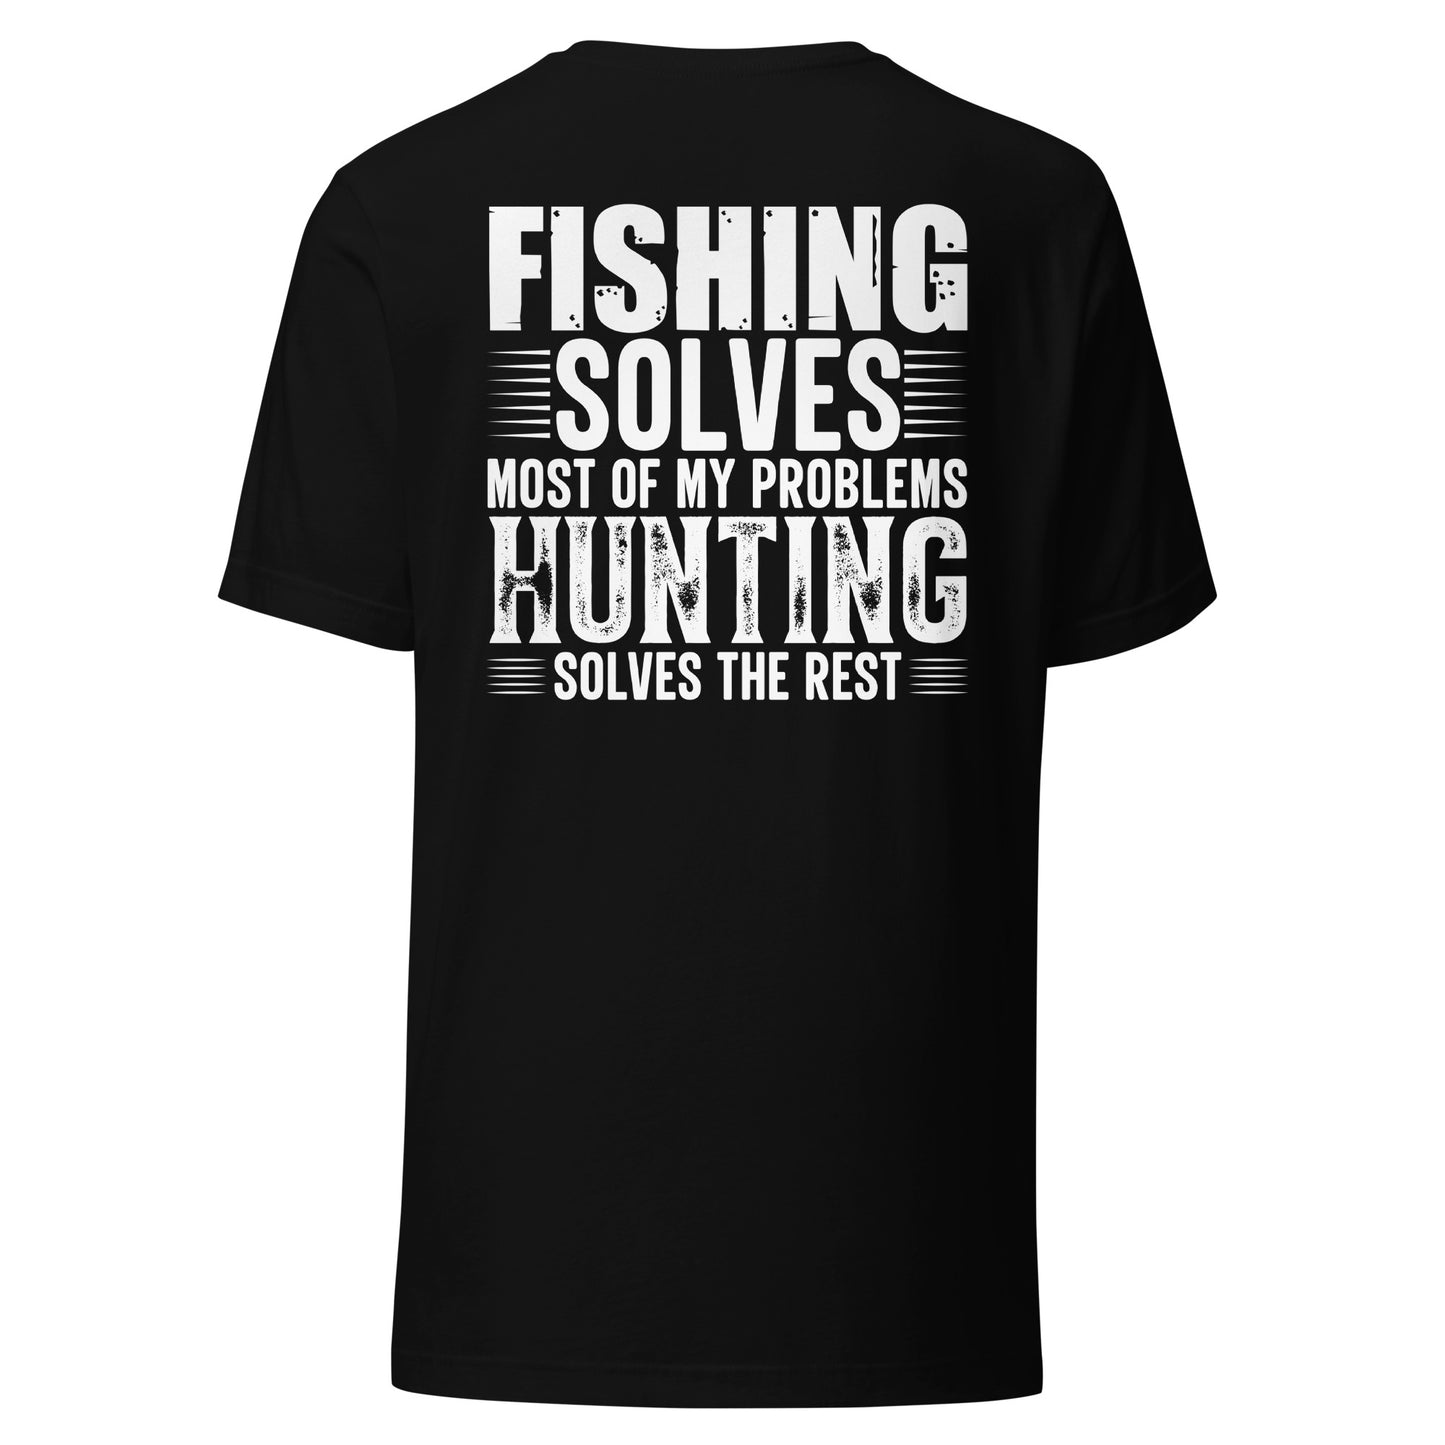 Fishing Solves Most of My Problems... T-shirt